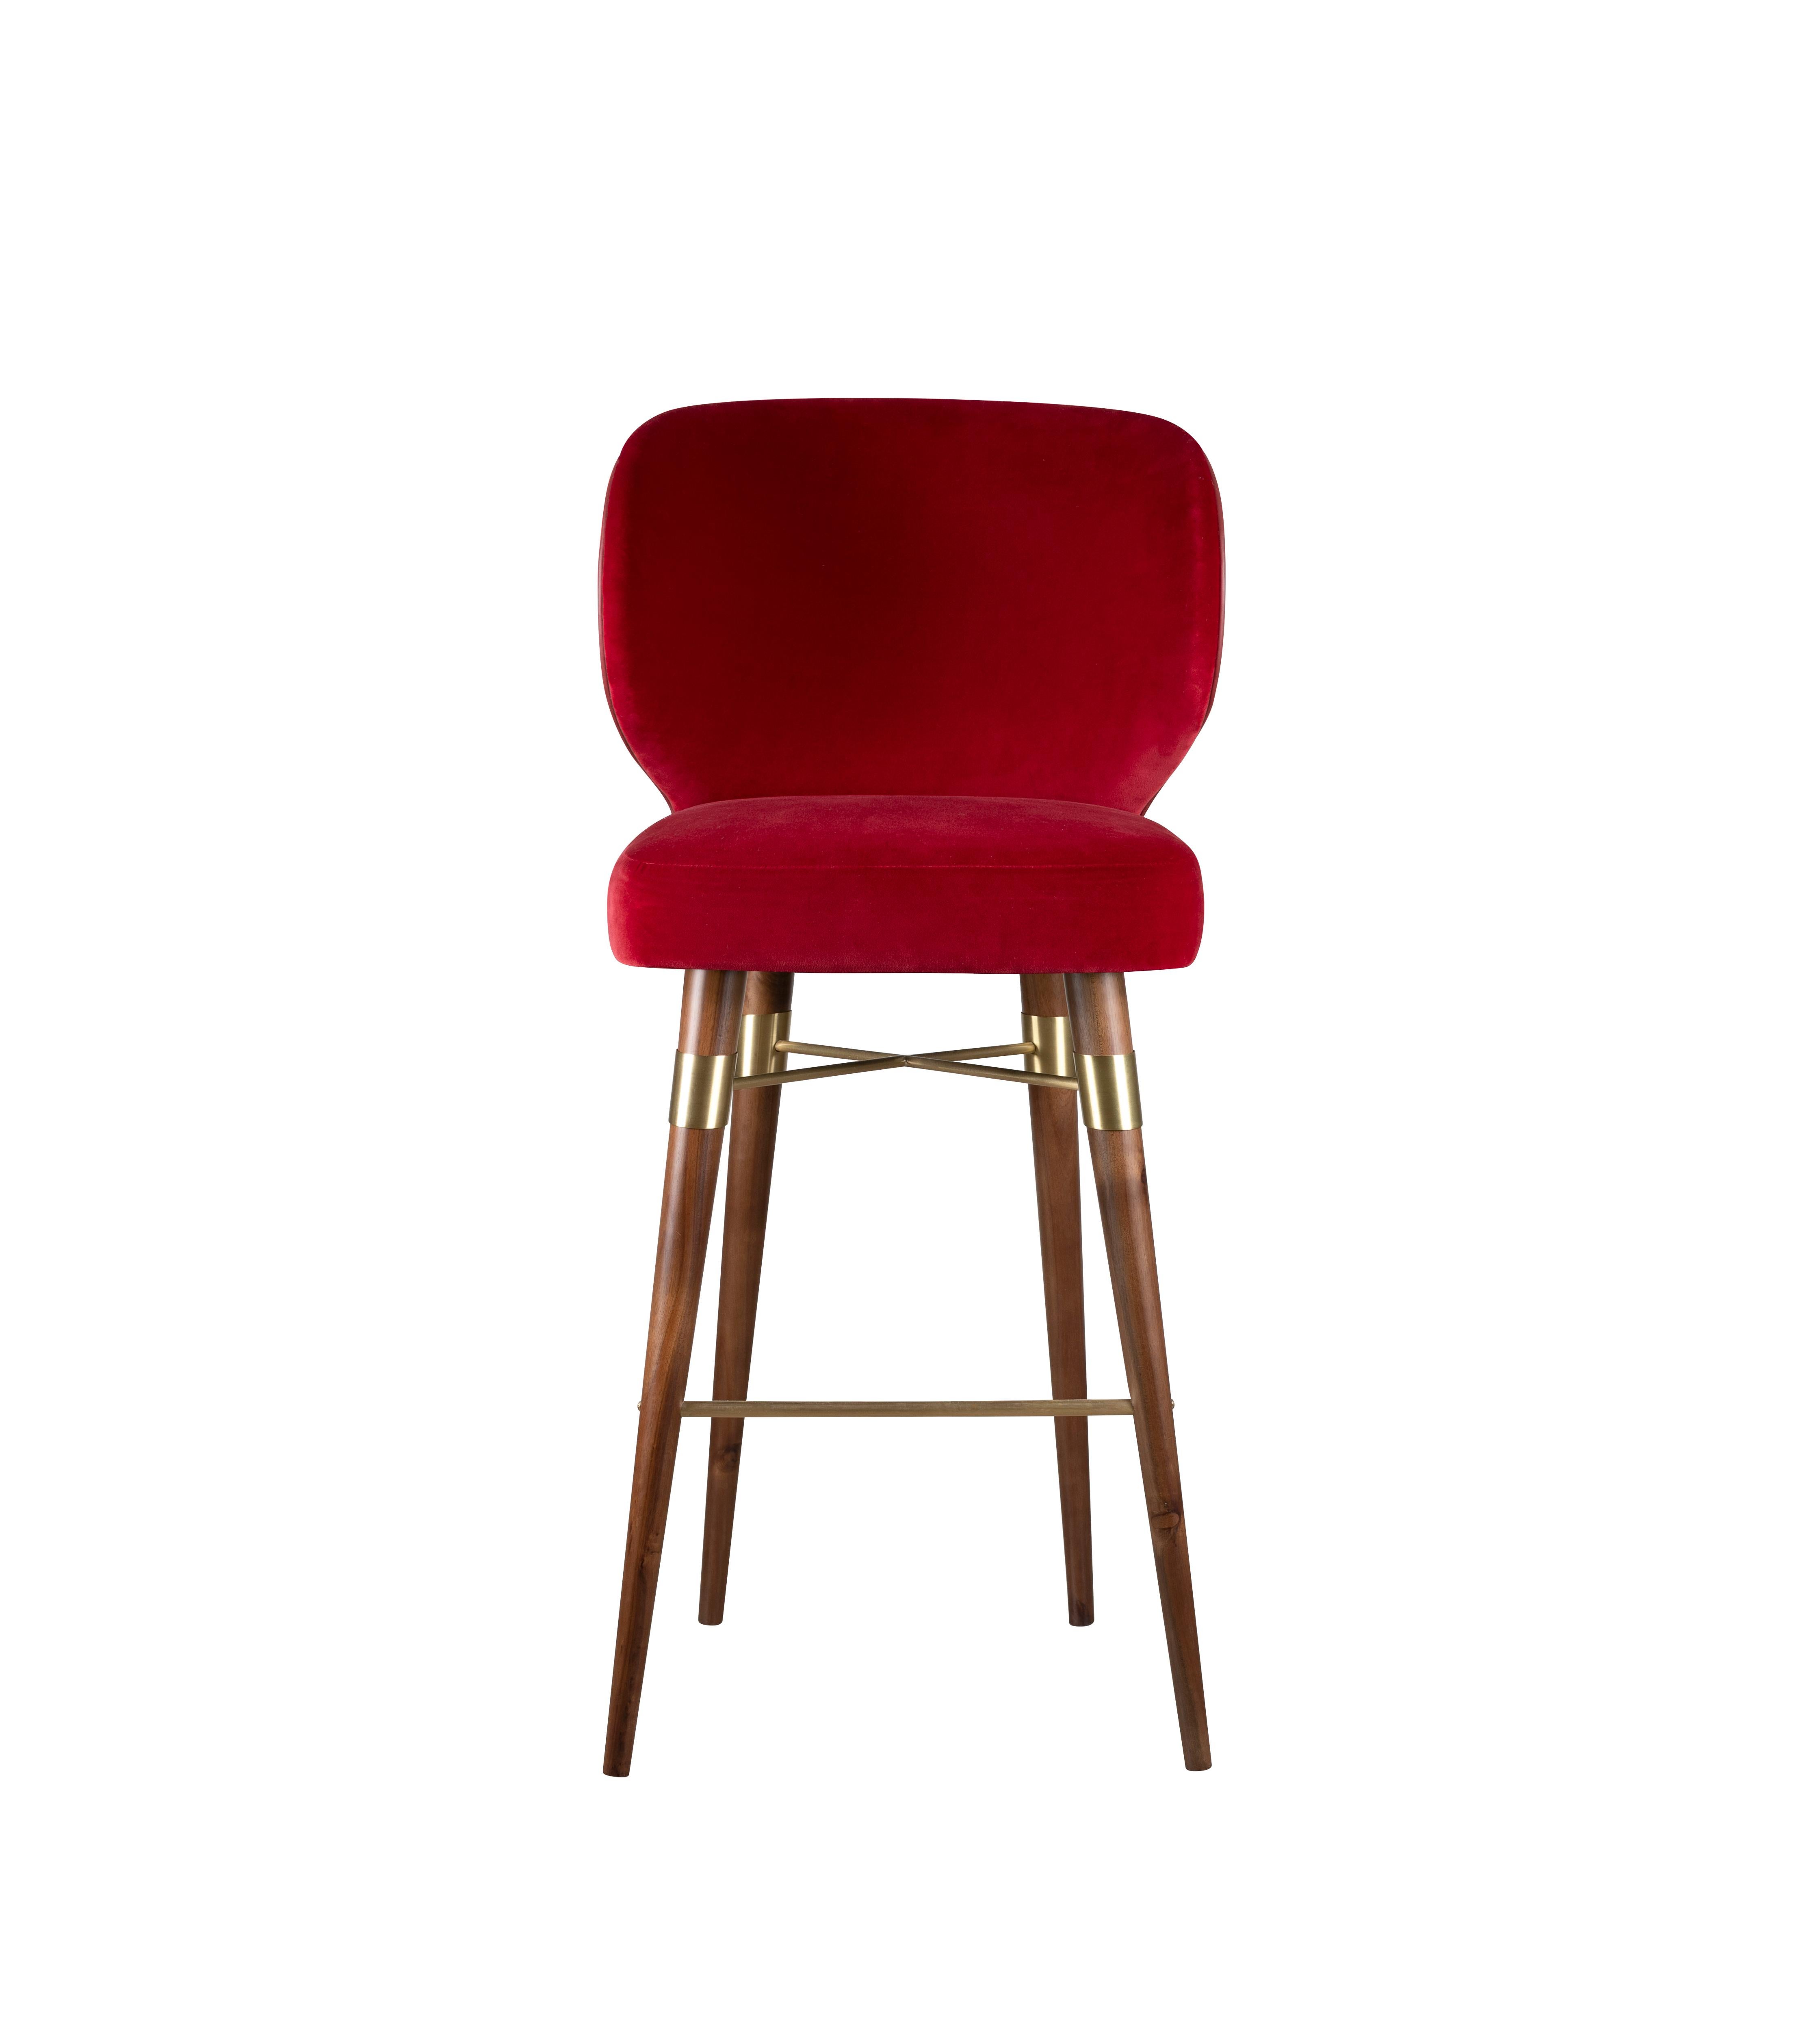 Louis bar chair is one of the Ottiu’s bestsellers.

Ottiu was inspired by the most important jazz trumpeter and singer ever, Louis Armstrong, to design the Louis midcentury bar chair. He was one of the first popular African-American entertainers to